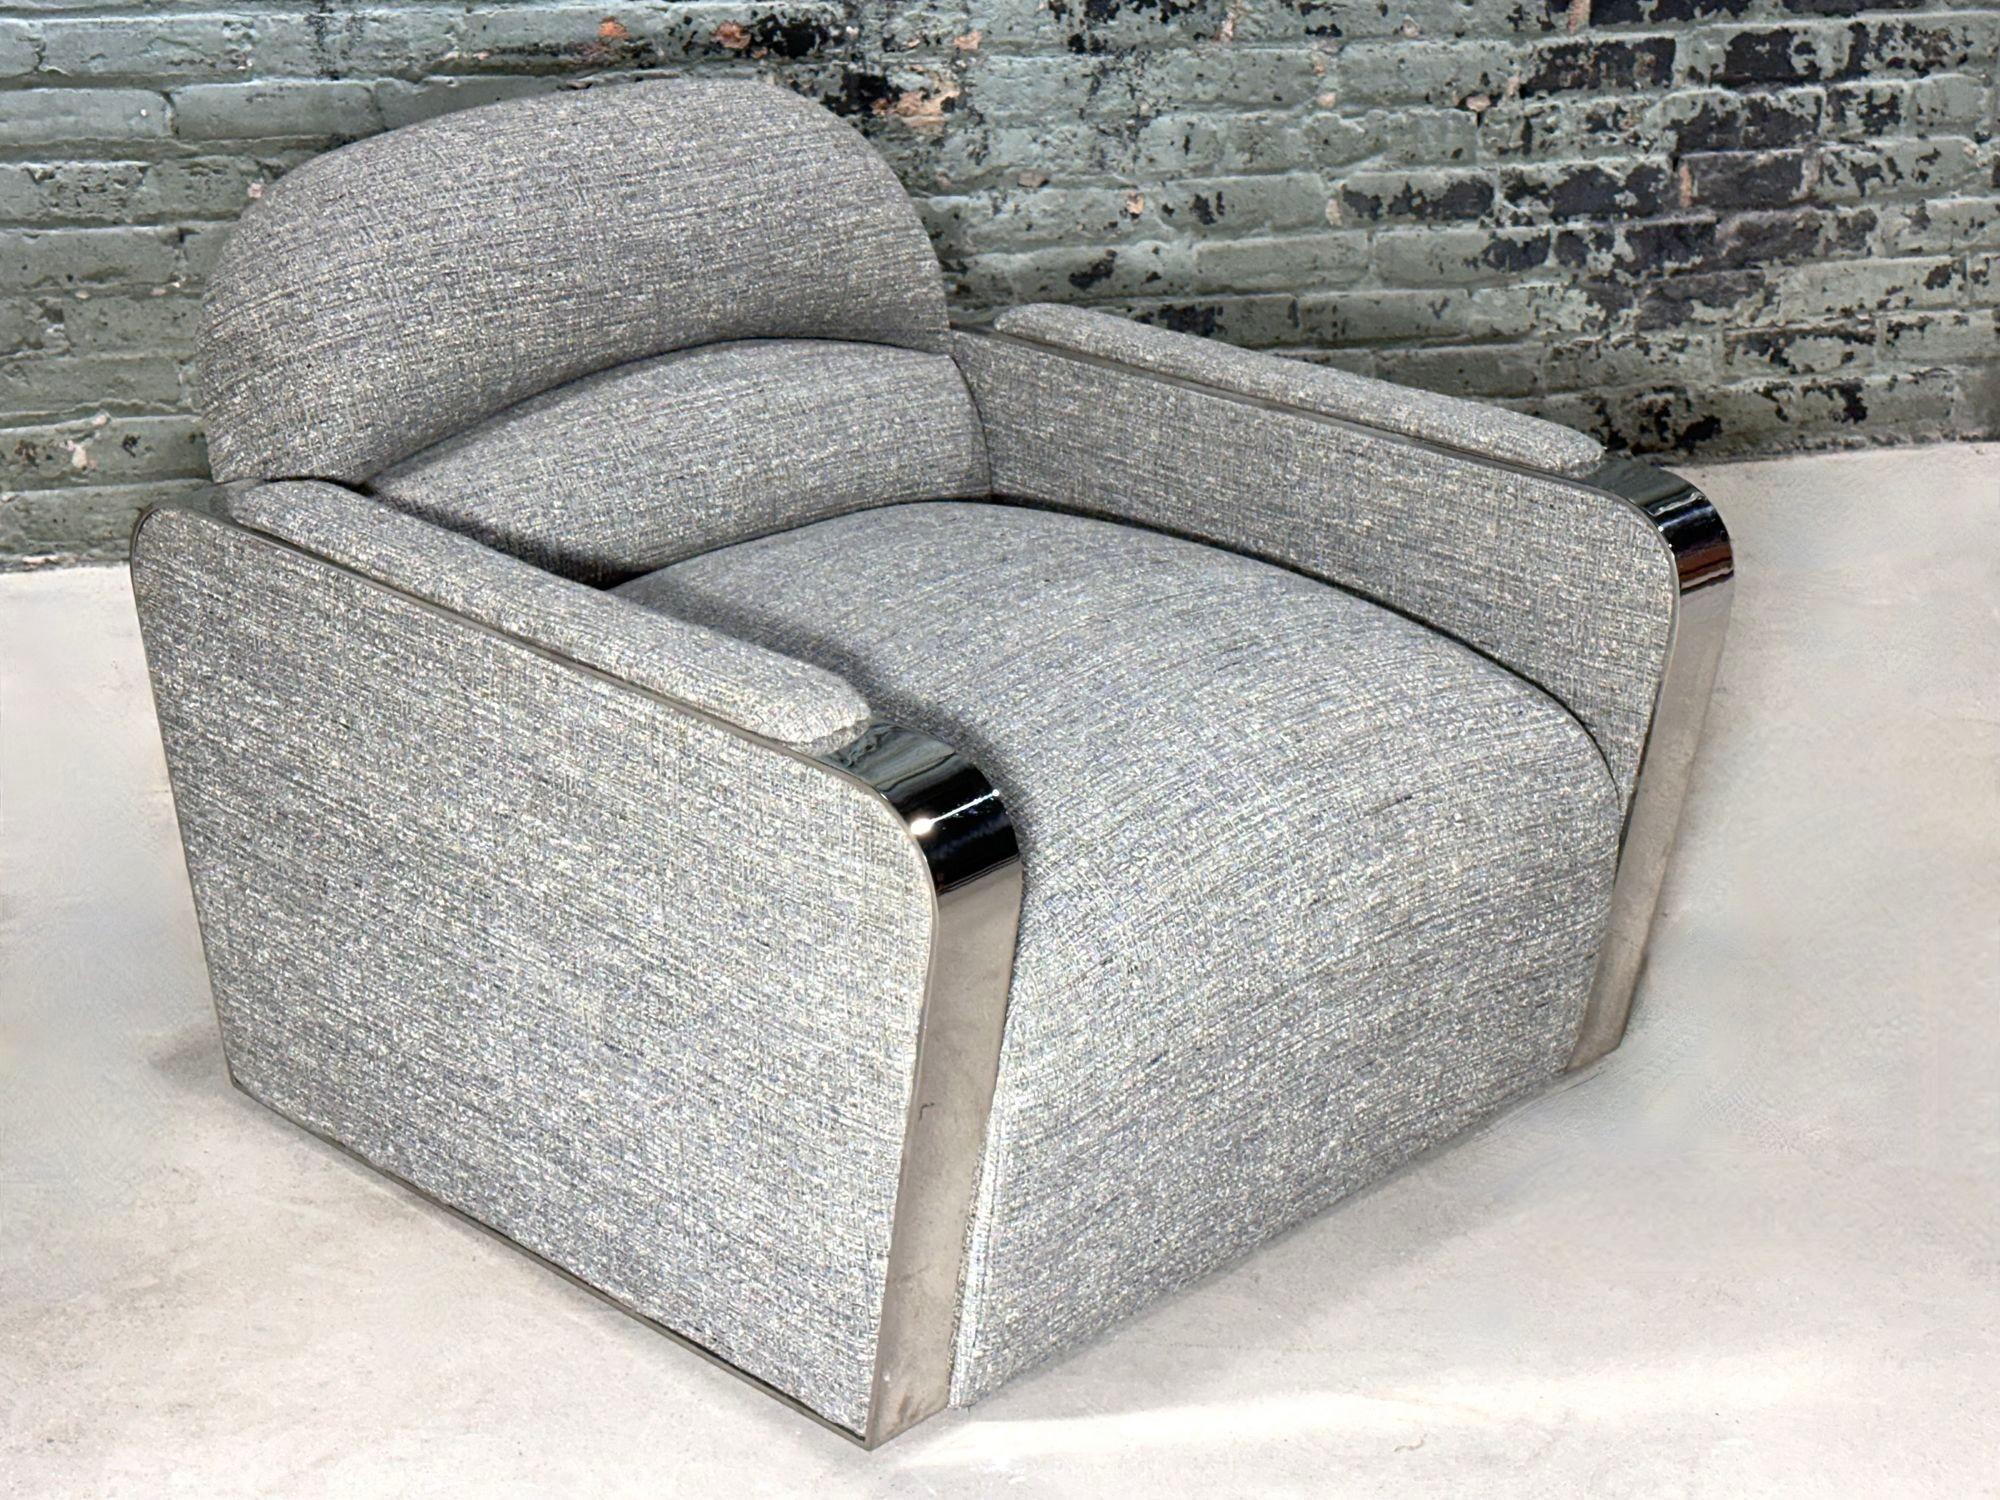 Brueton Habana Lounge Chair by Stanley Friedman, 1980. This is the Habana Lounge Chair. Completely restored and reupholstered.

